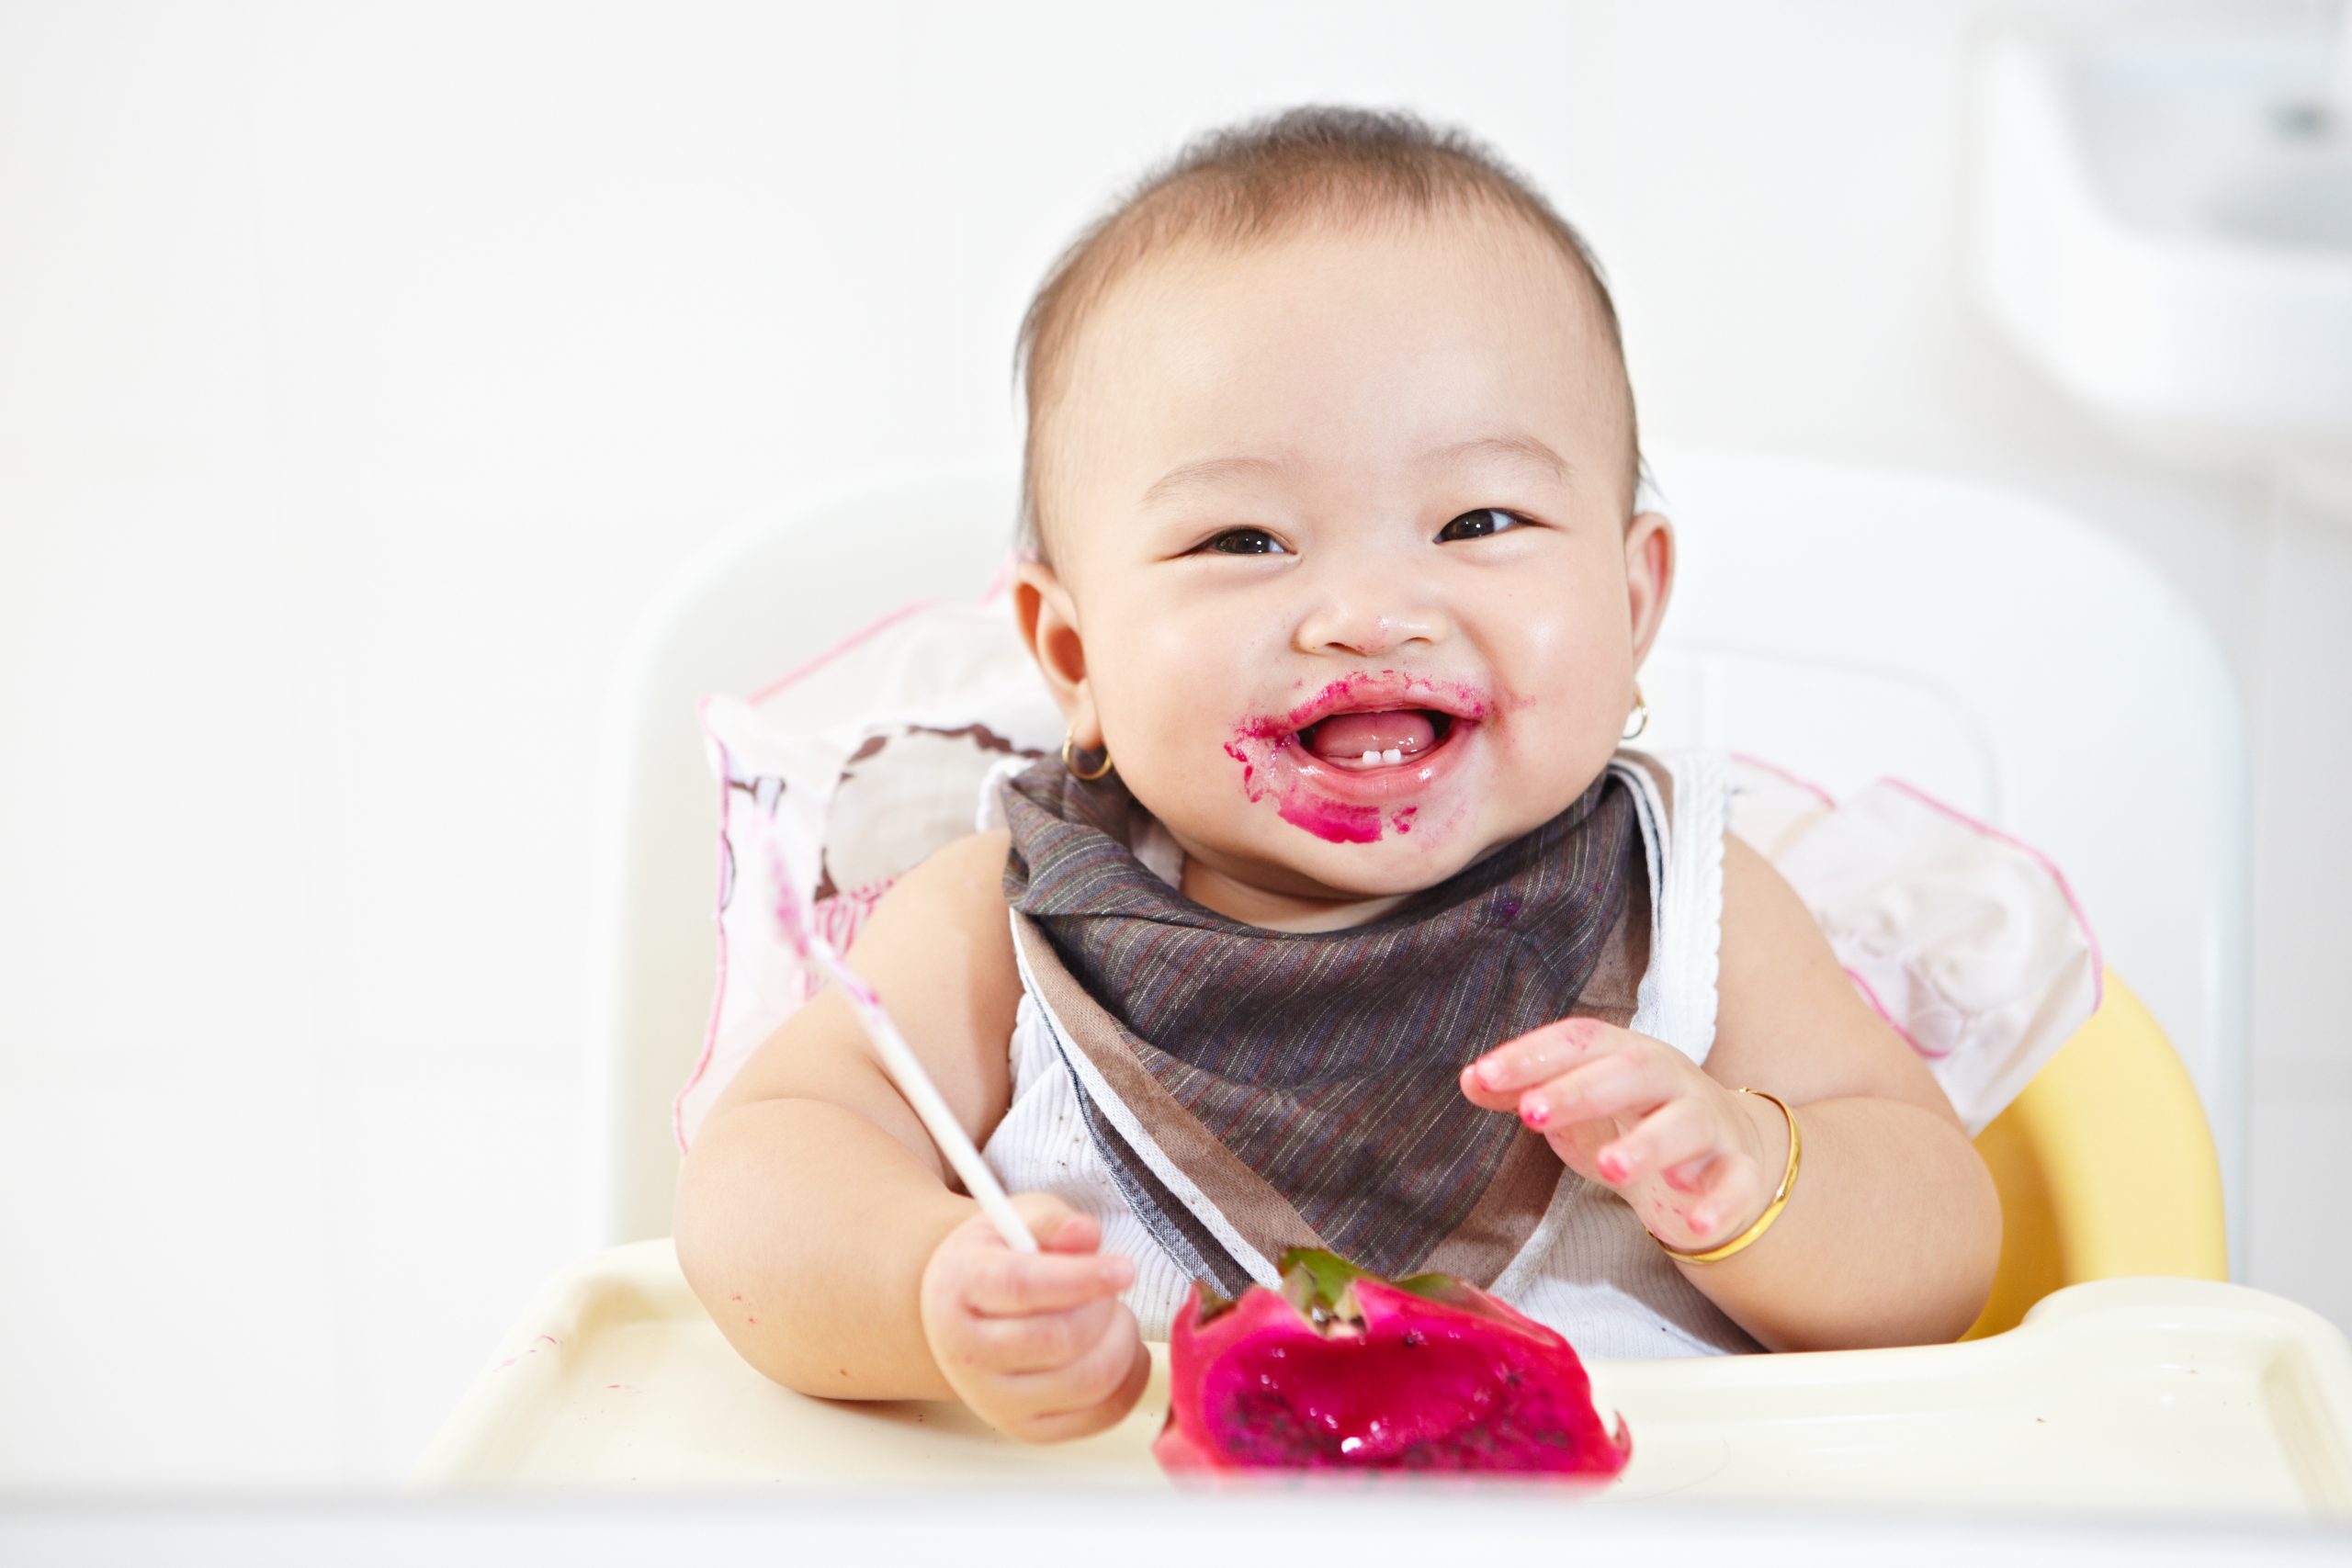 Baby in high chair eating red dragon fruit, smiling